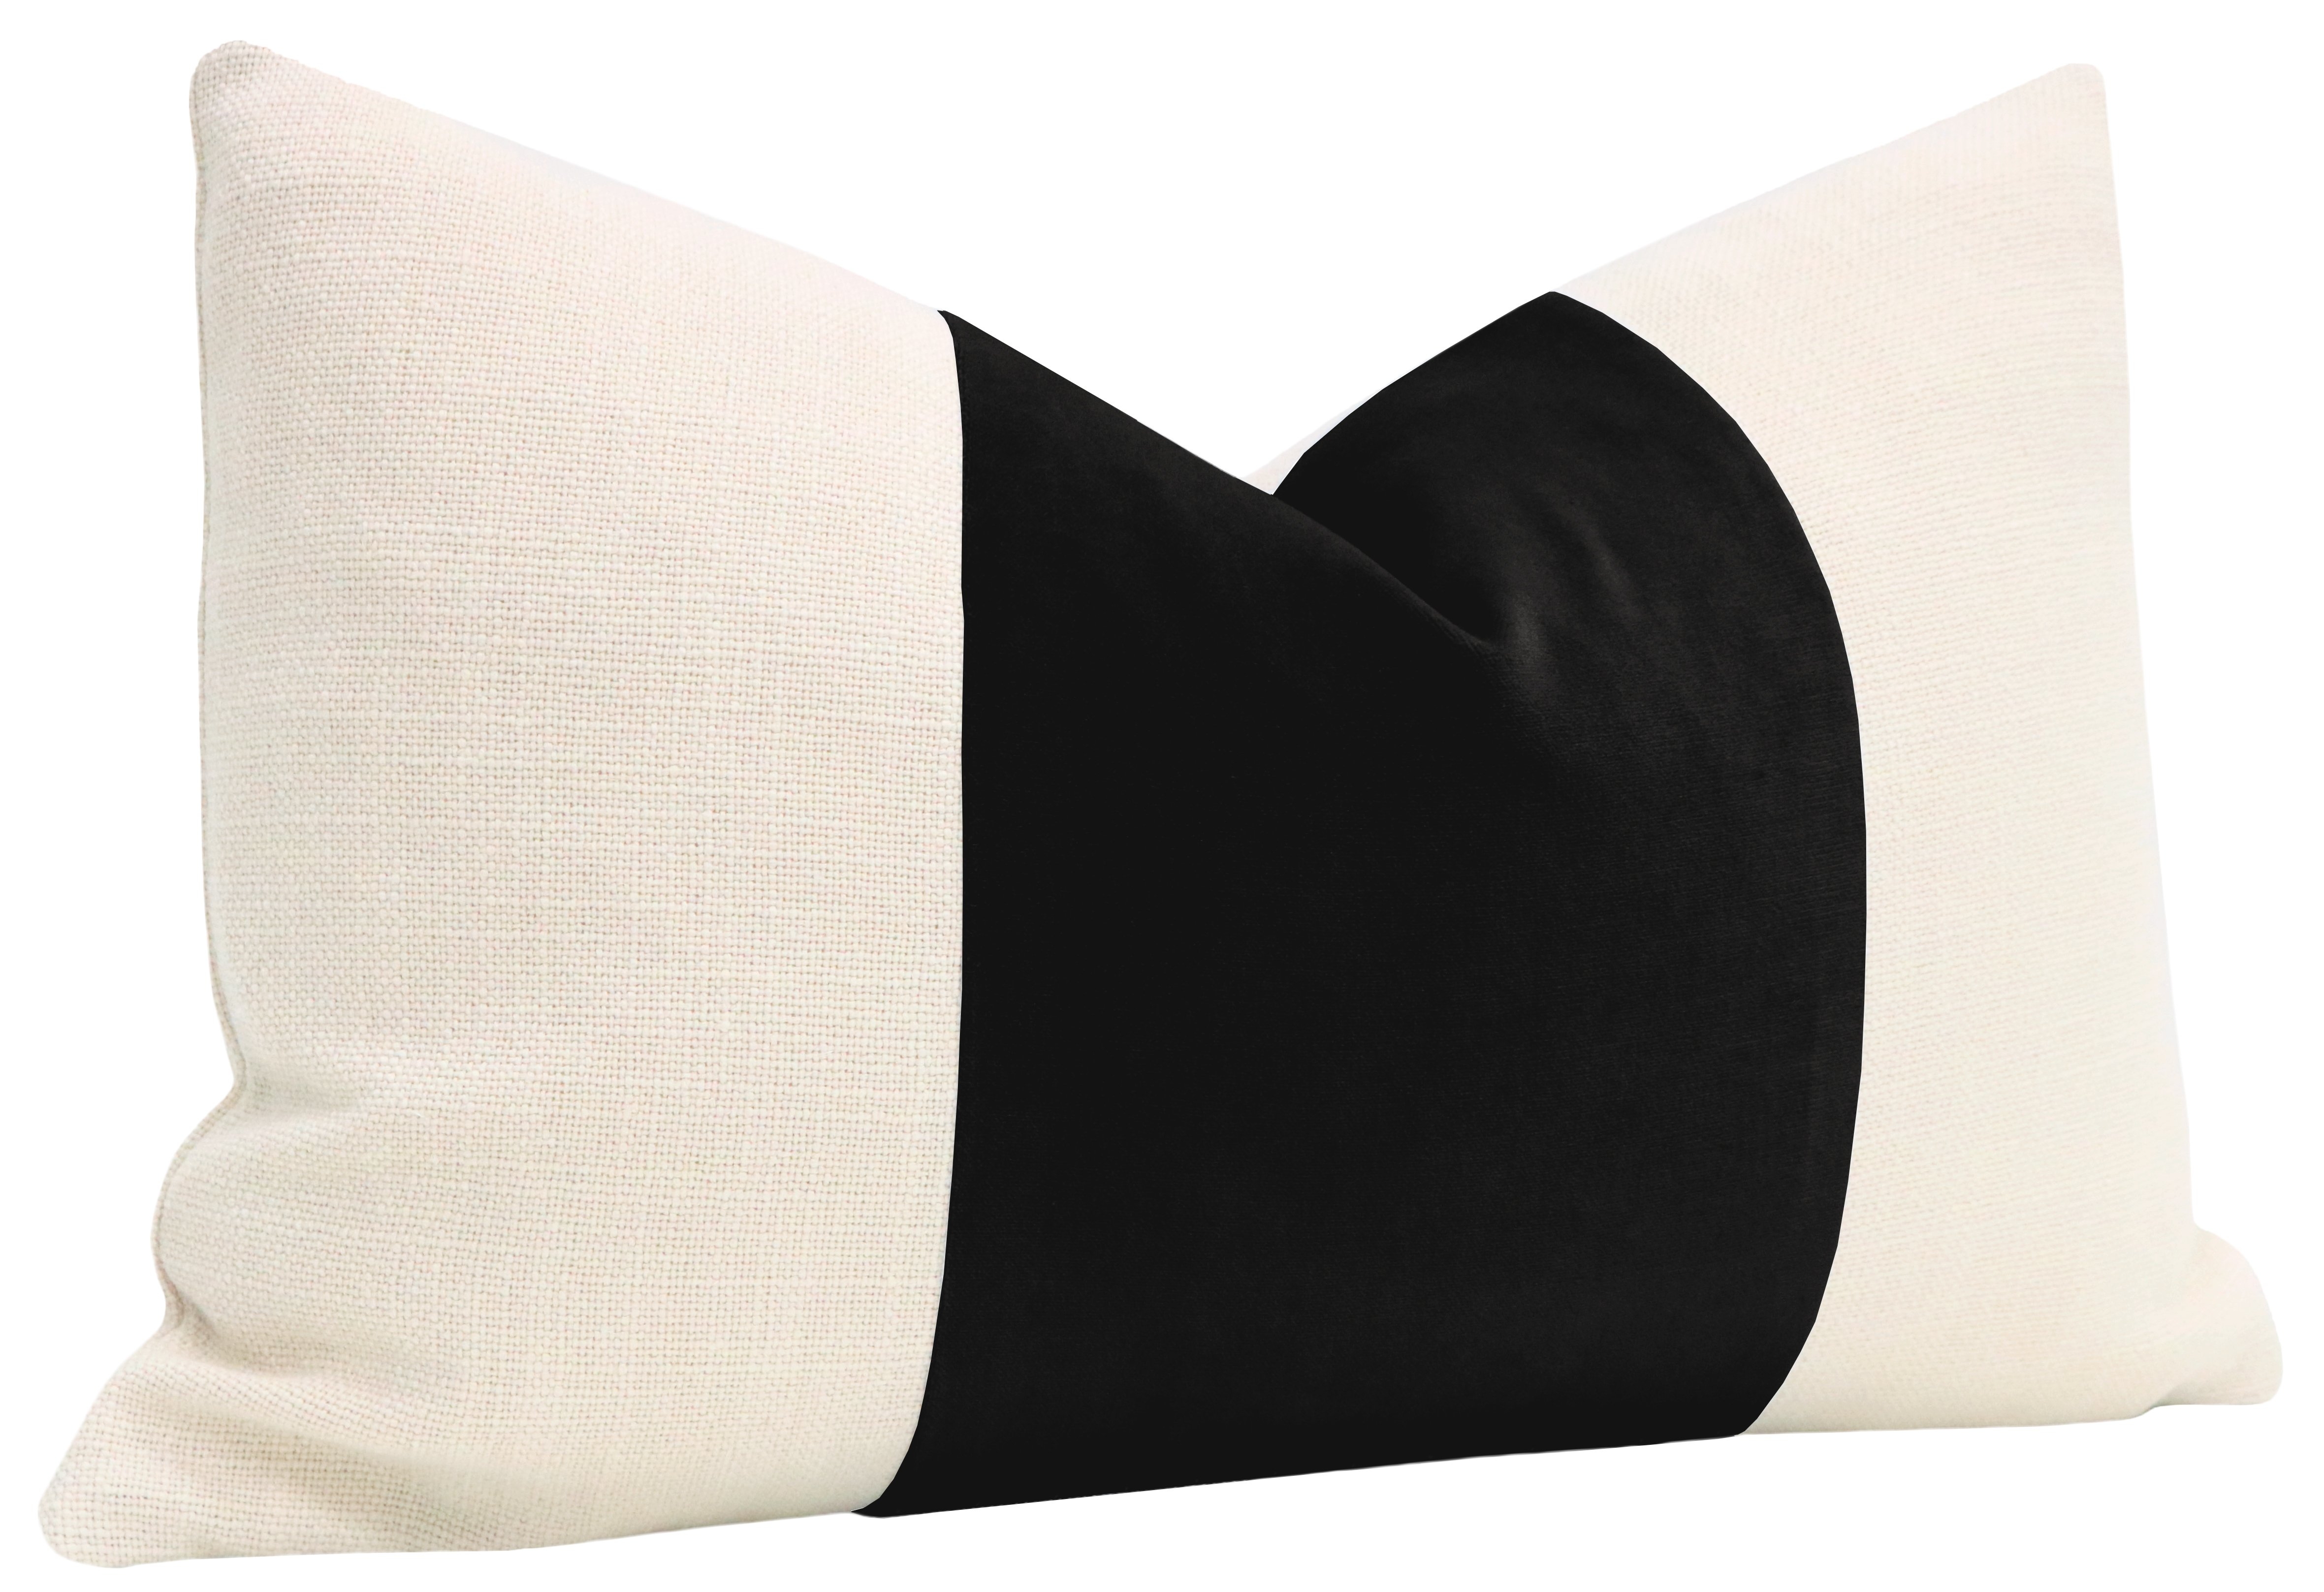 Discontinued The Little Lumbar :: PANEL Classic Velvet // Ebony - 12" X 18" PILLOW COVER - Image 1